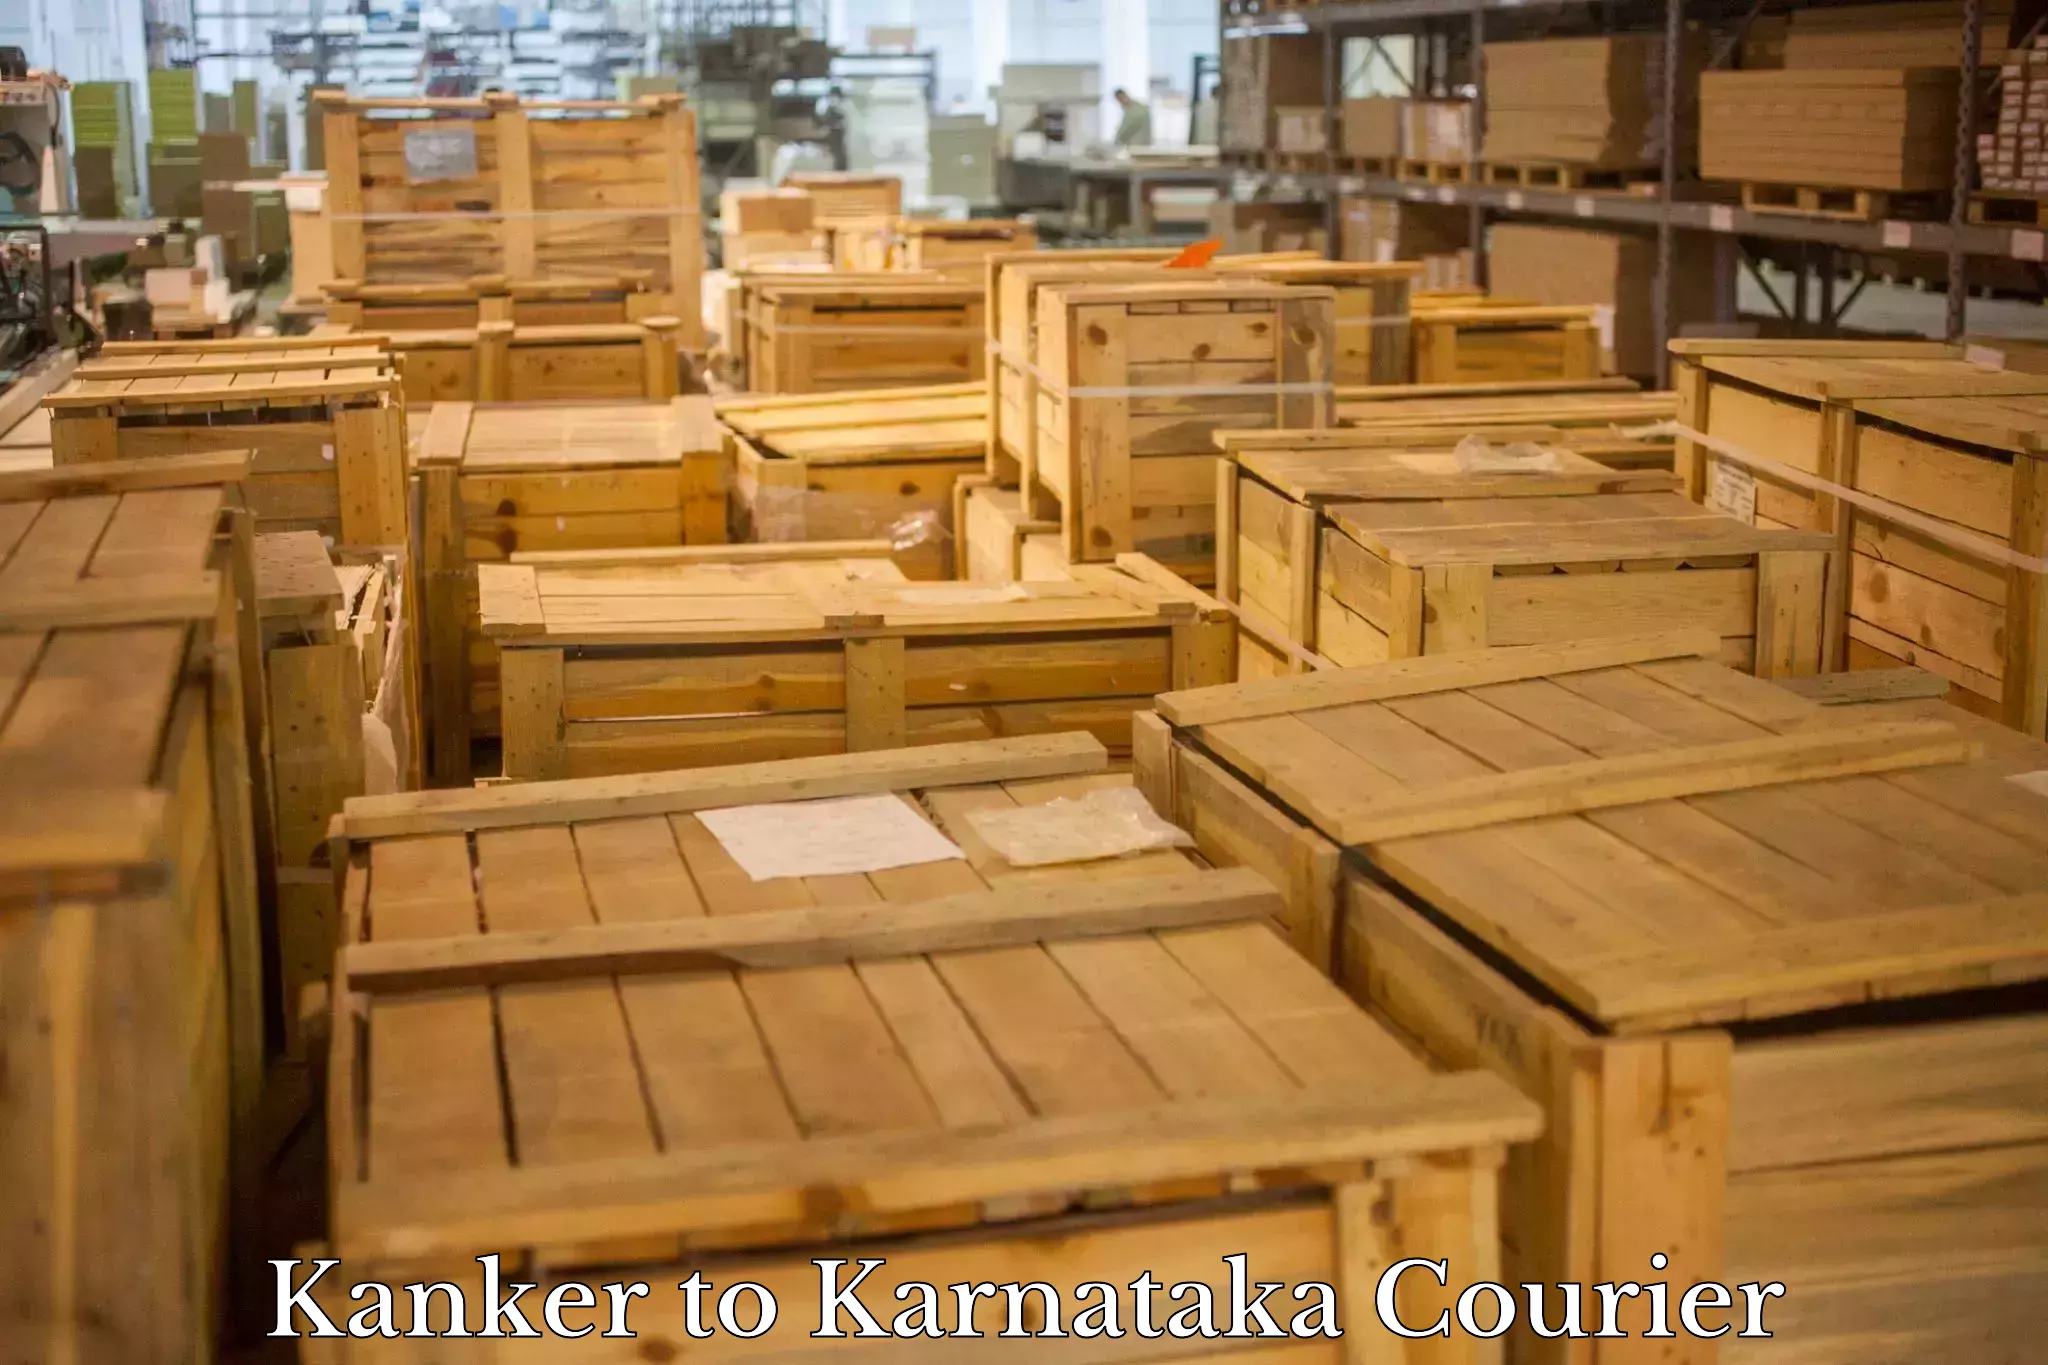 Next day courier Kanker to Mangalore Port